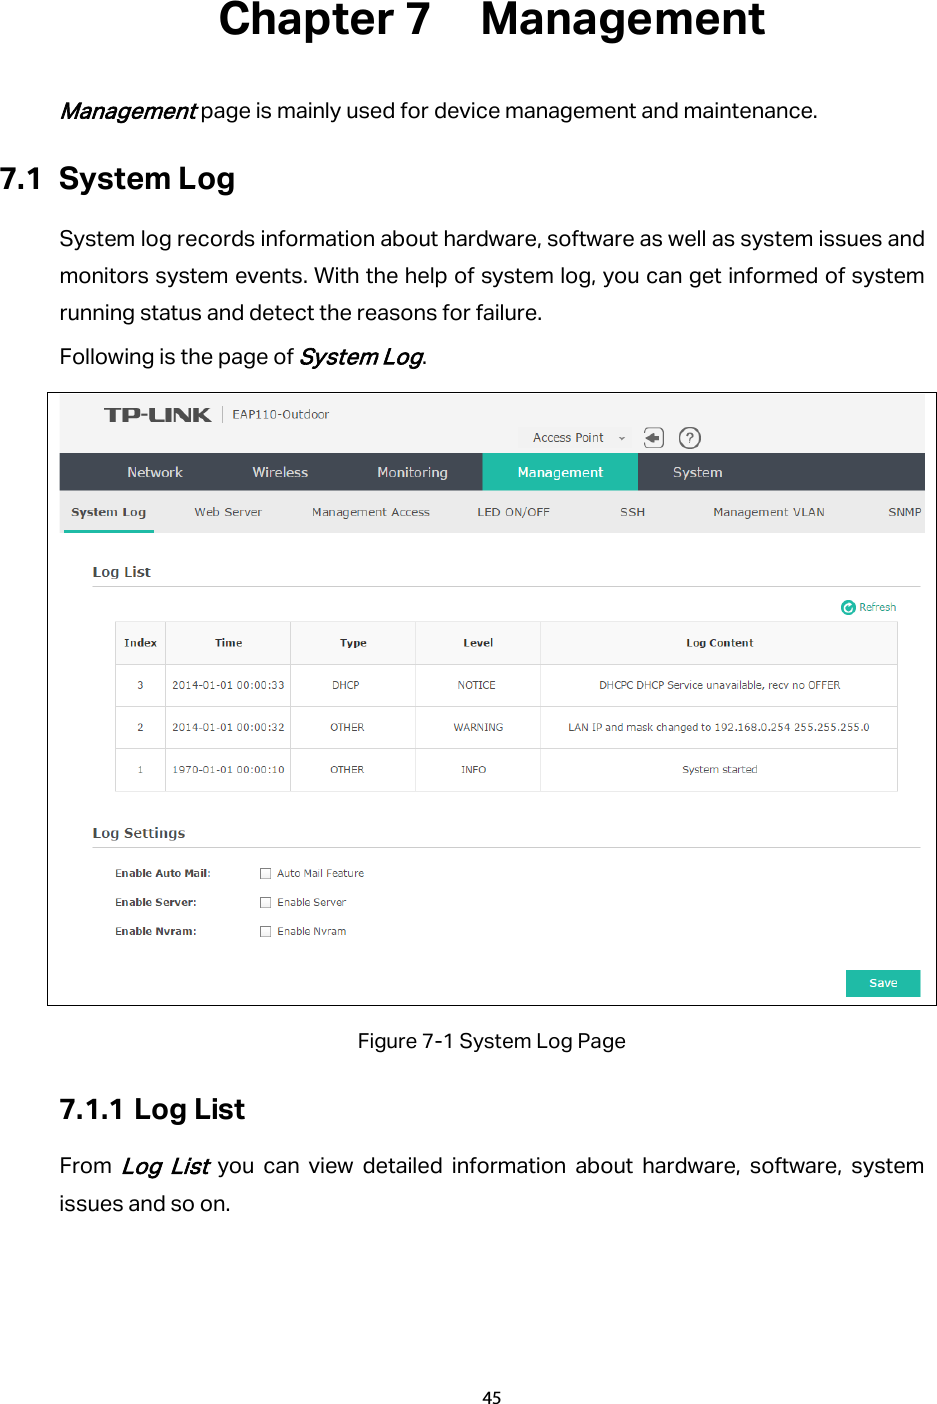 Chapter 7  Management   Management page is mainly used for device management and maintenance. 7.1 System Log System log records information about hardware, software as well as system issues and monitors system events. With the help of system log, you can get informed of system running status and detect the reasons for failure. Following is the page of System Log.  Figure 7-1 System Log Page 7.1.1 Log List From Log List you can view detailed information about hardware, software, system issues and so on. 45  